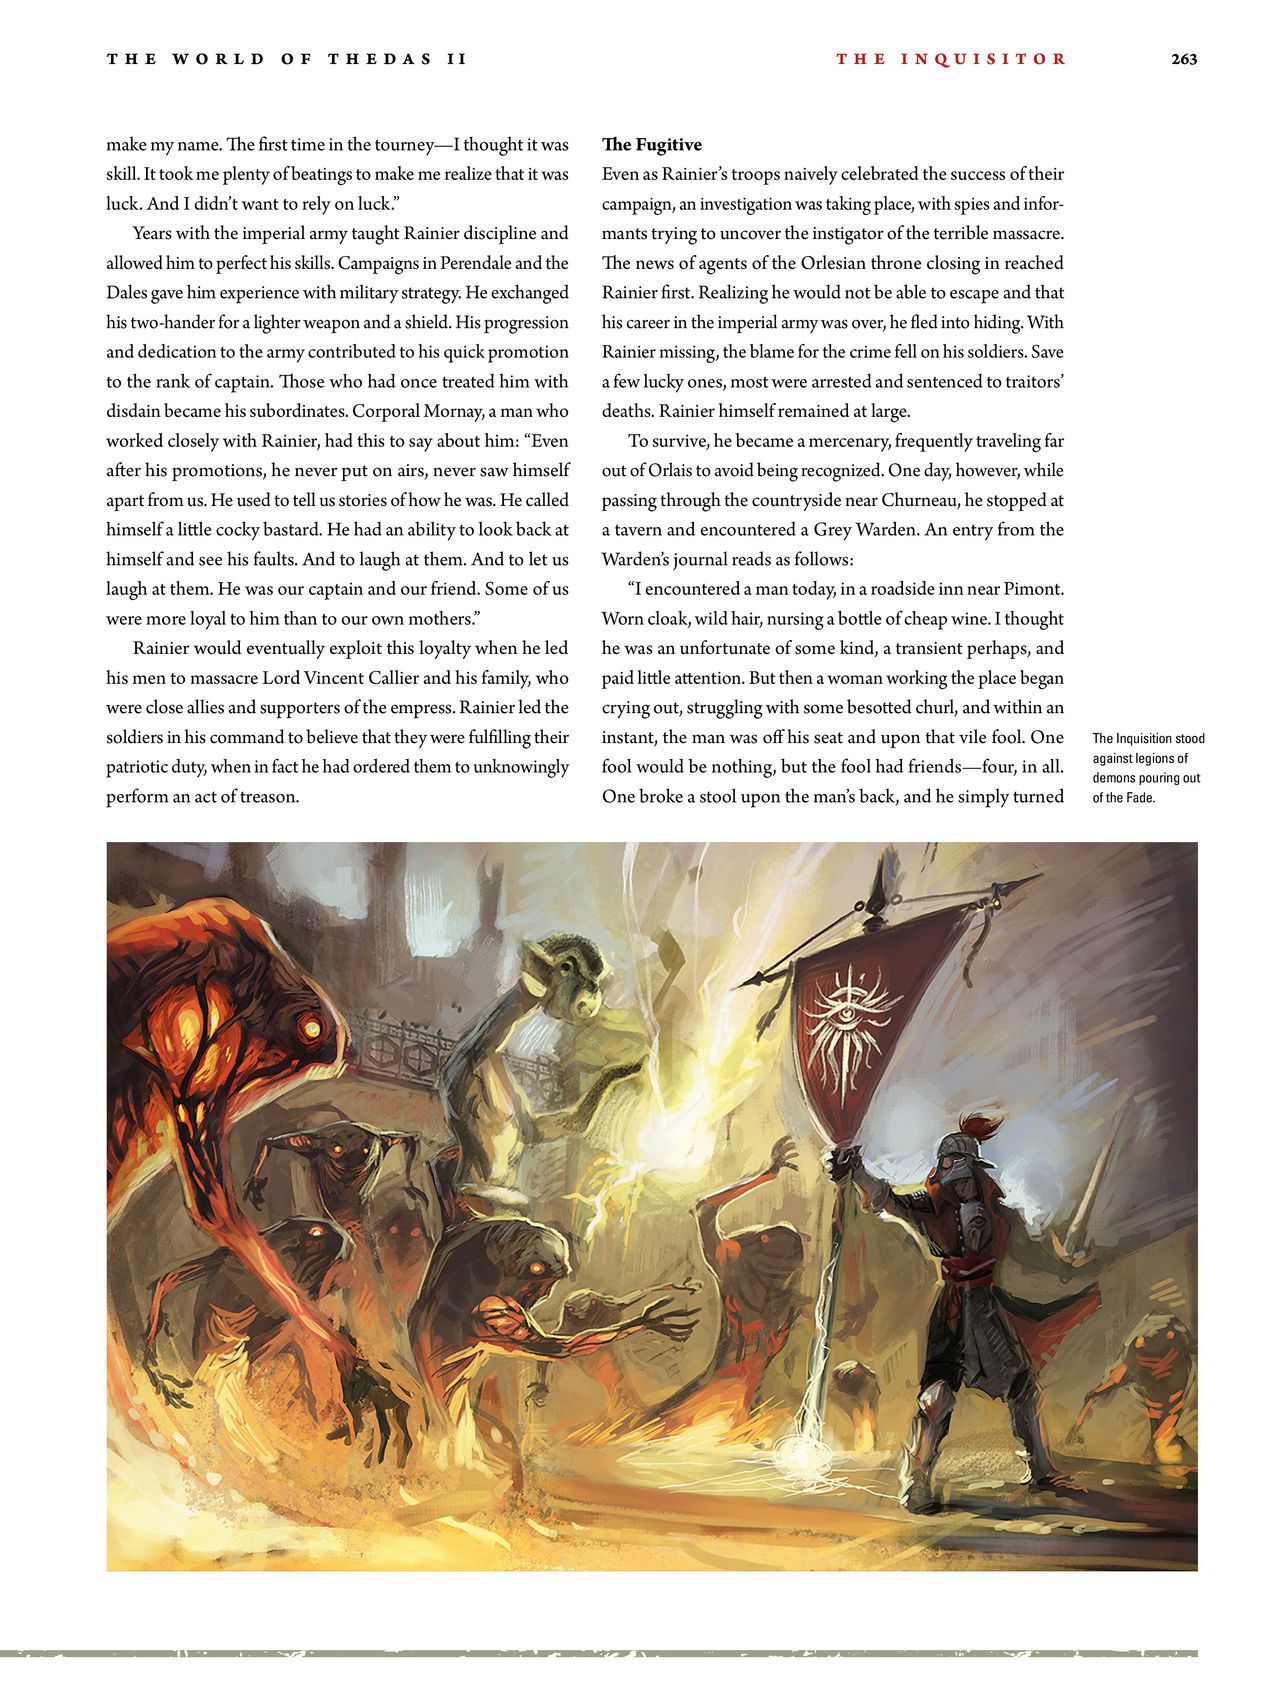 Dragon Age - The World of Thedas v02 256